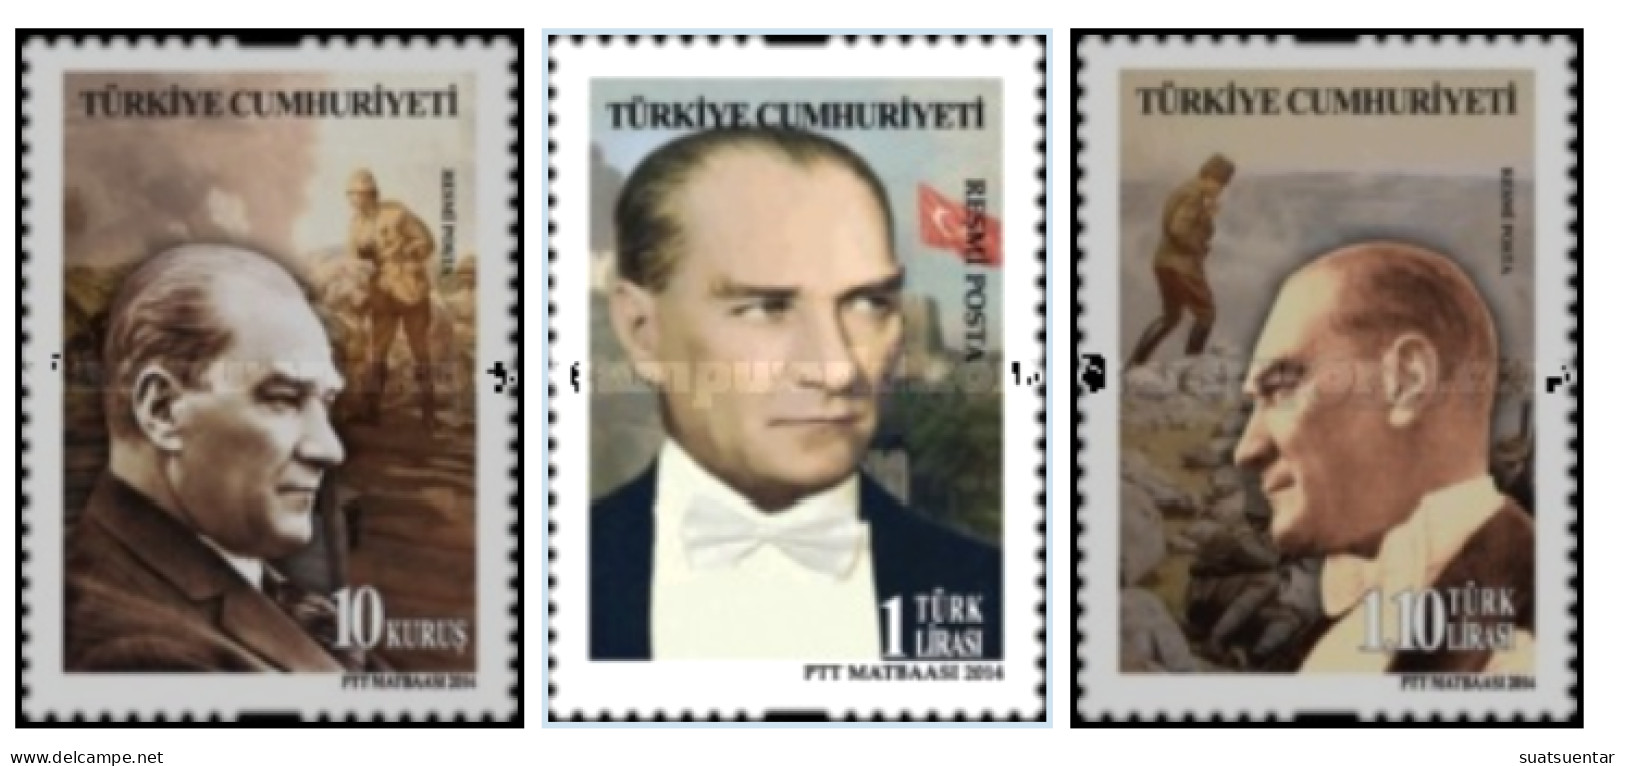 2014 Official Stamps - Ataturk MNH - Official Stamps